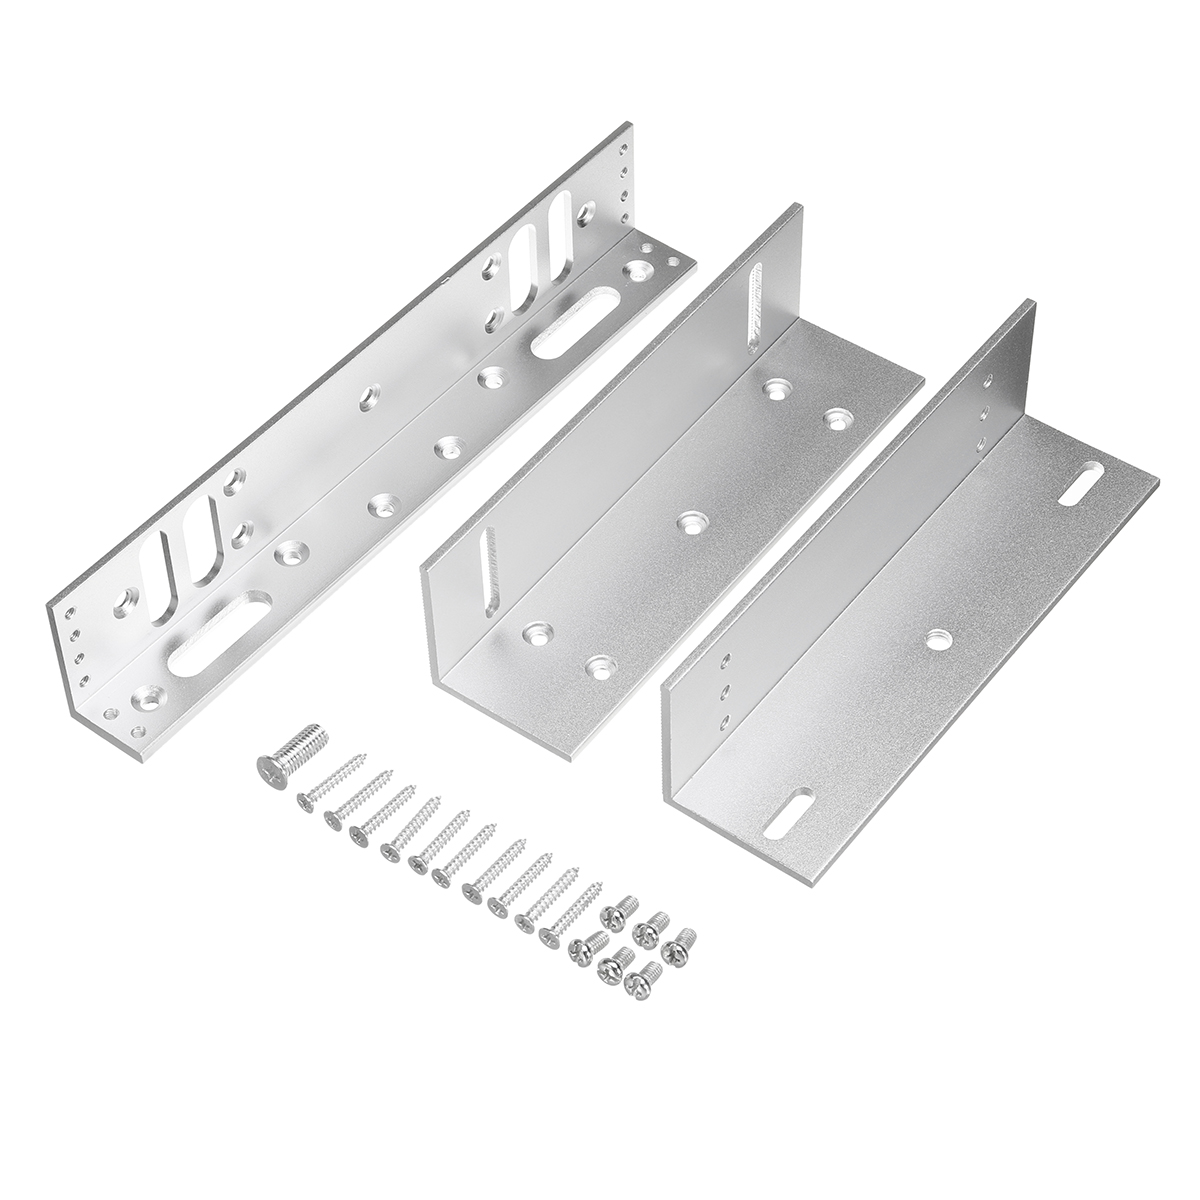 Biometric Security - Z&L Mounting Bracket 280KG 600lbs Electric Magnetic  Lock Door Access Control Kit was listed for R420.00 on 29 Jul at 16:19 by  Gearify in Outside South Africa (ID:472998588)